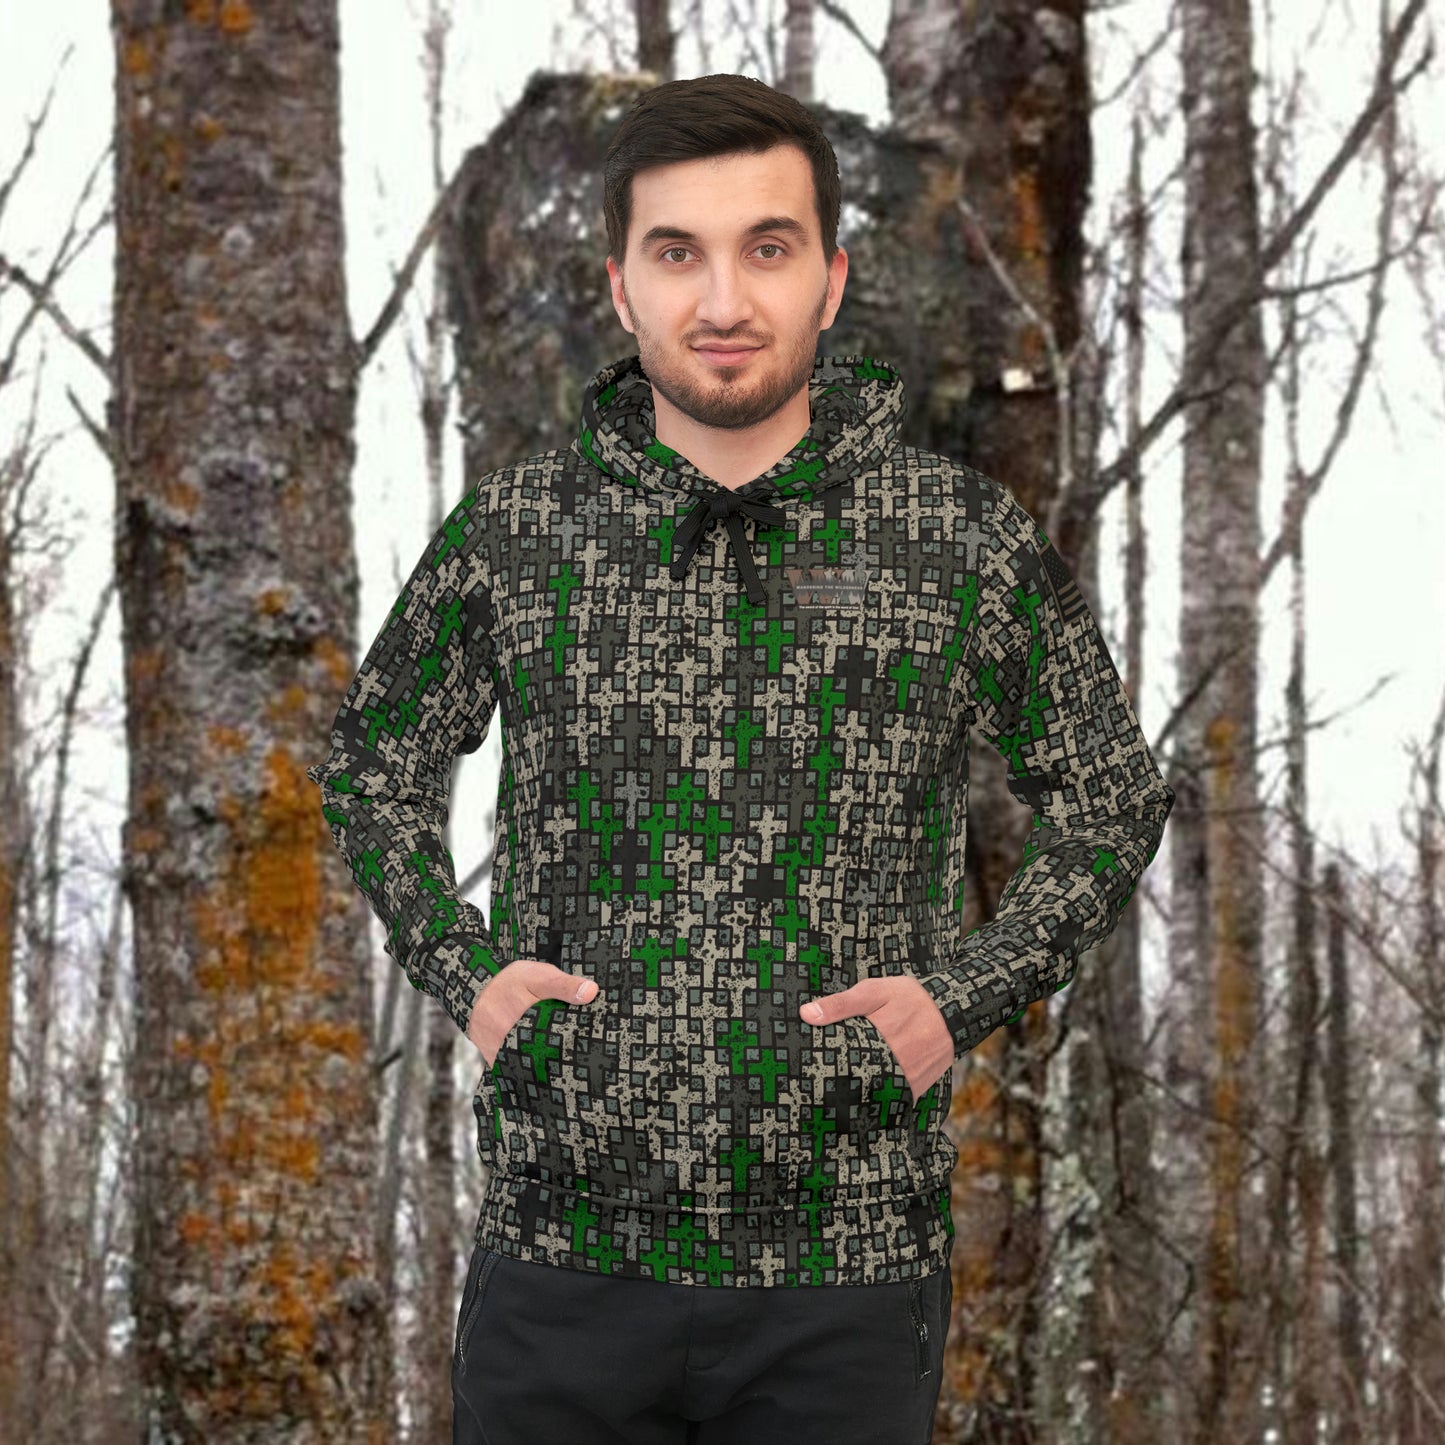 Wandering the Wilderness Hickory Flats camo unisex Athletic Hoodie. These tend to run small so we recommend buying one size larger than you normally wear, also these are made on demand and can take two weeks or longer to be delivered.